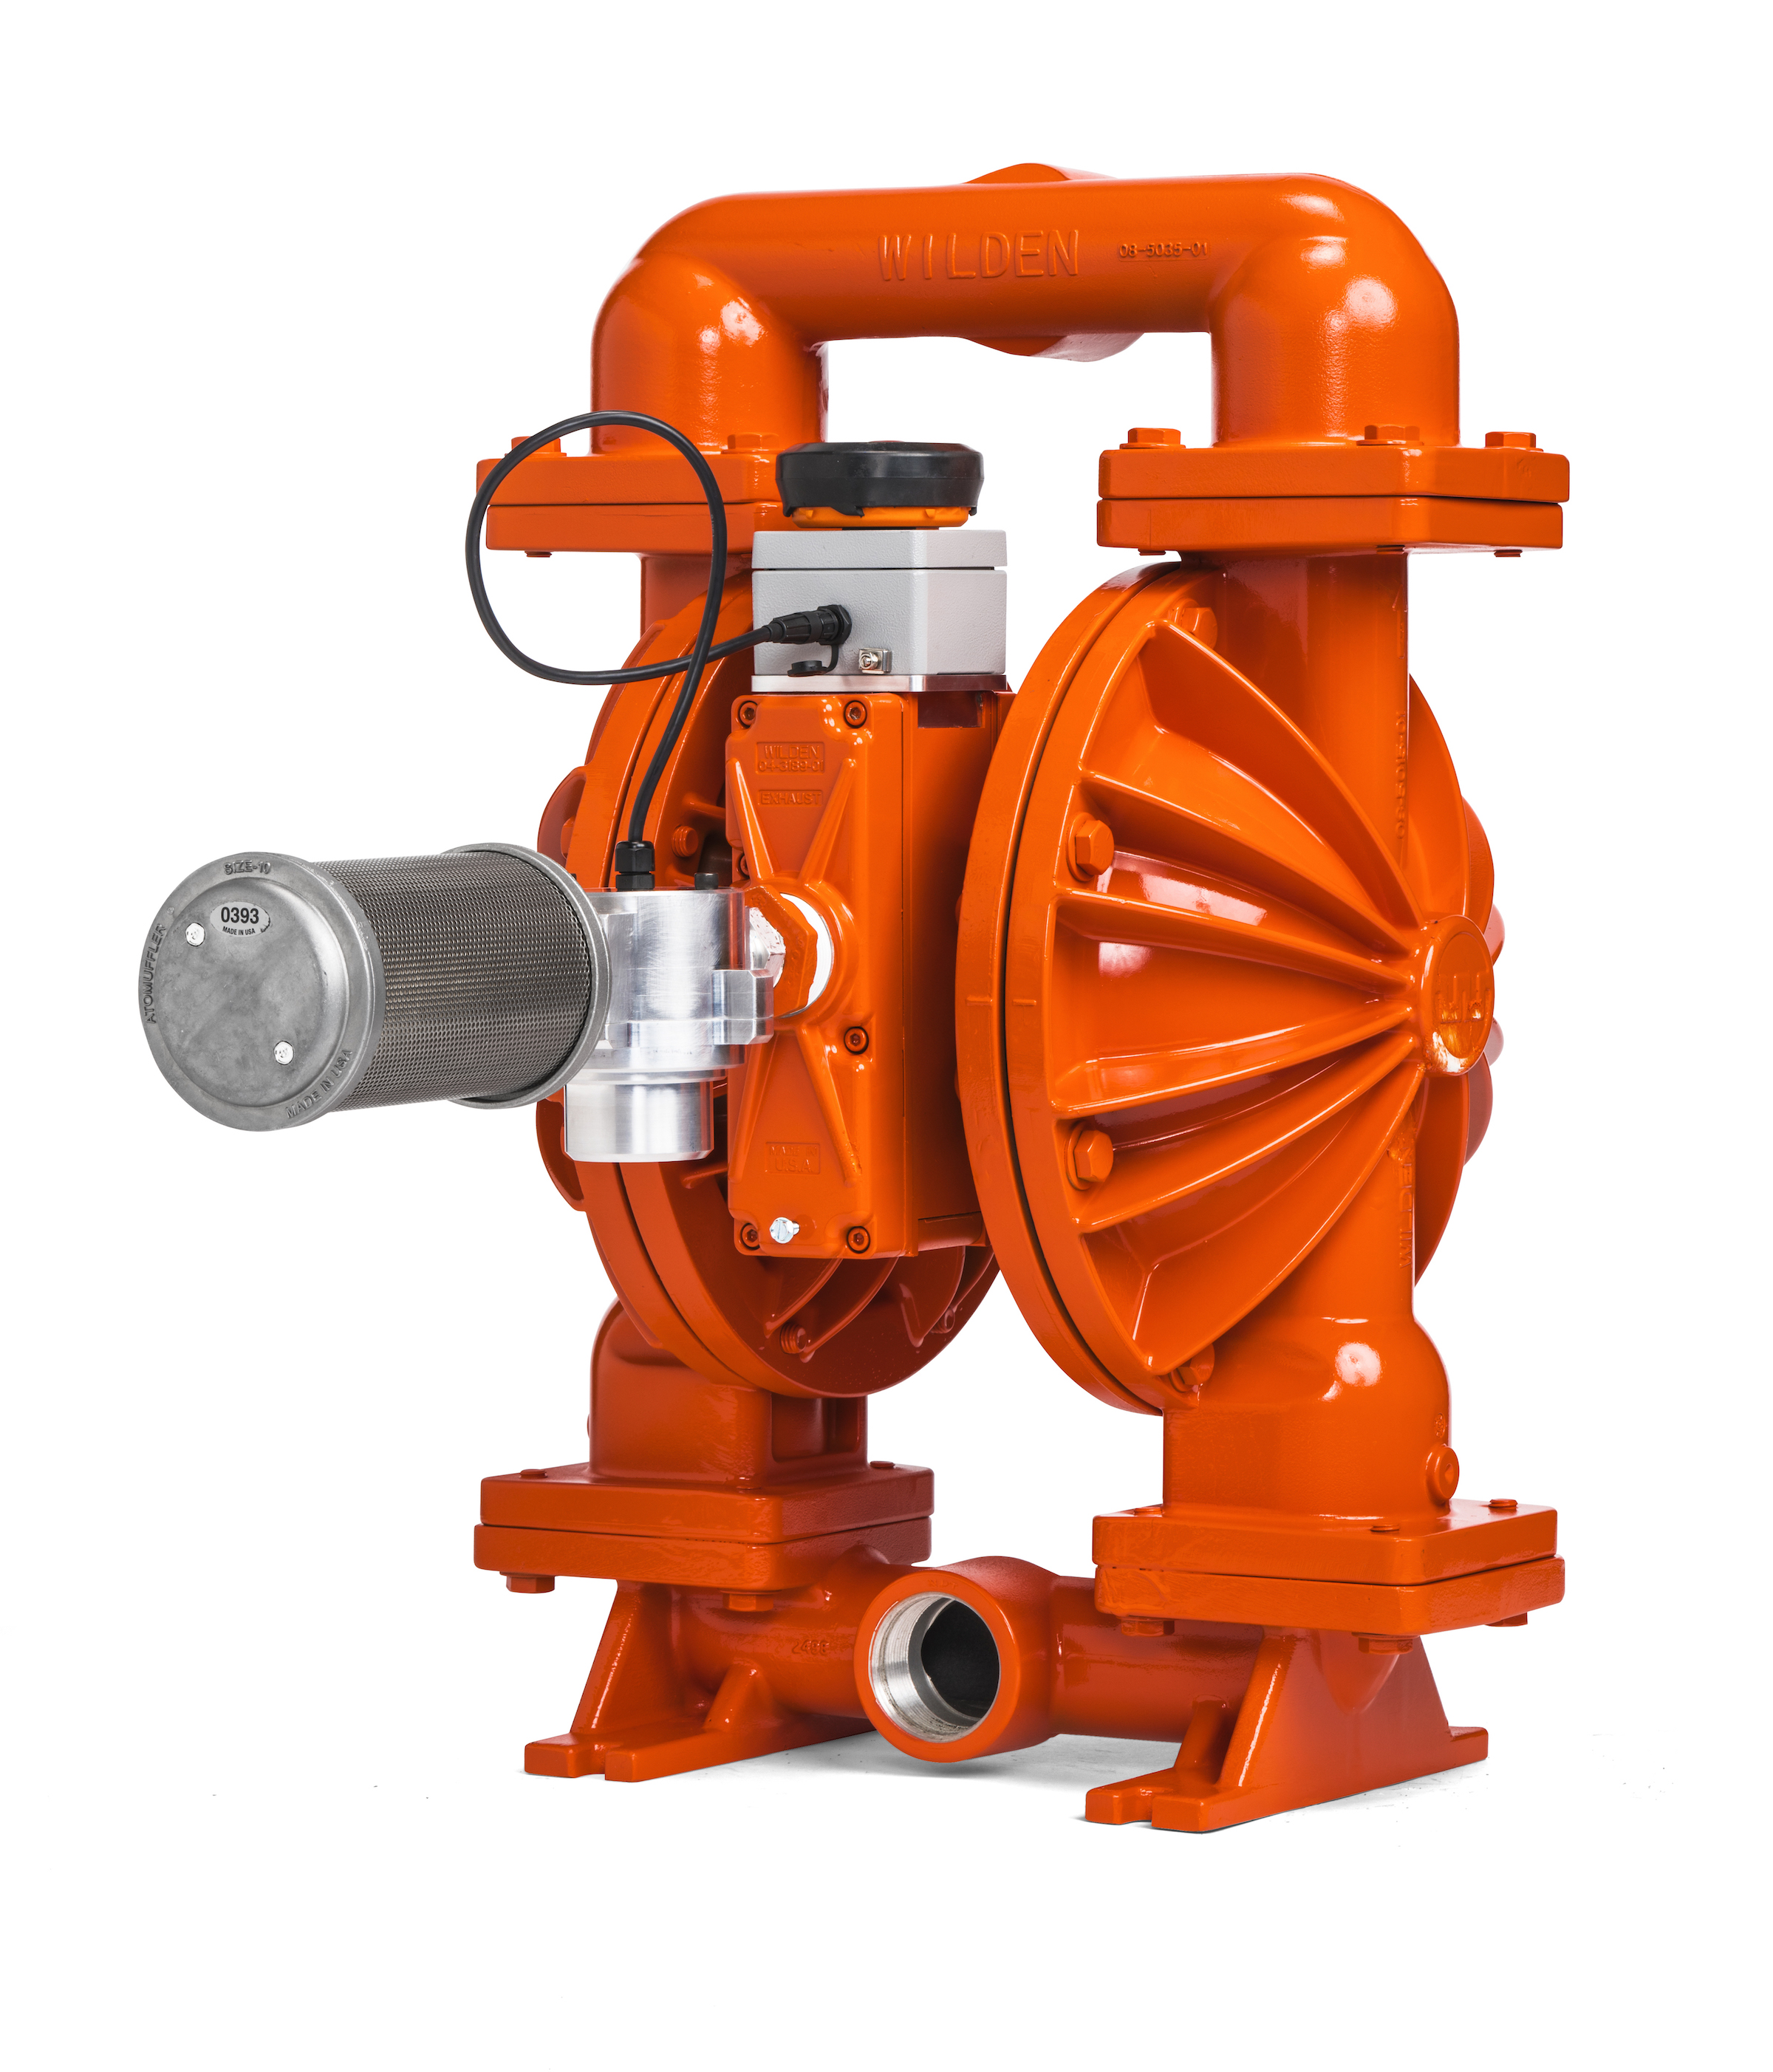 The connected Wilden SafeGuard system is composed of a single battery-powered sensor mounted directly onto the pump.